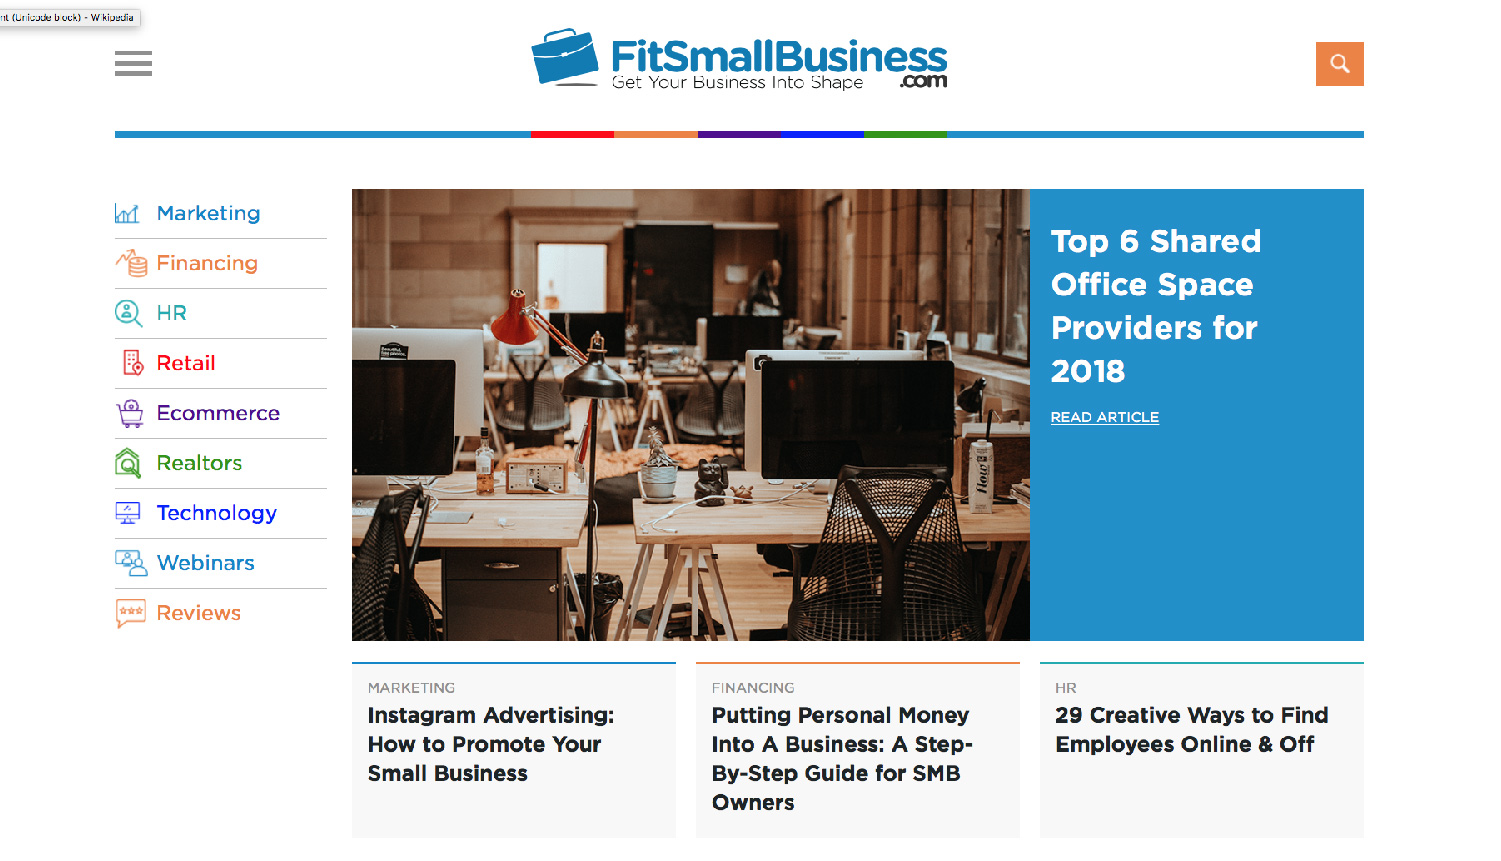 Fit Small Business